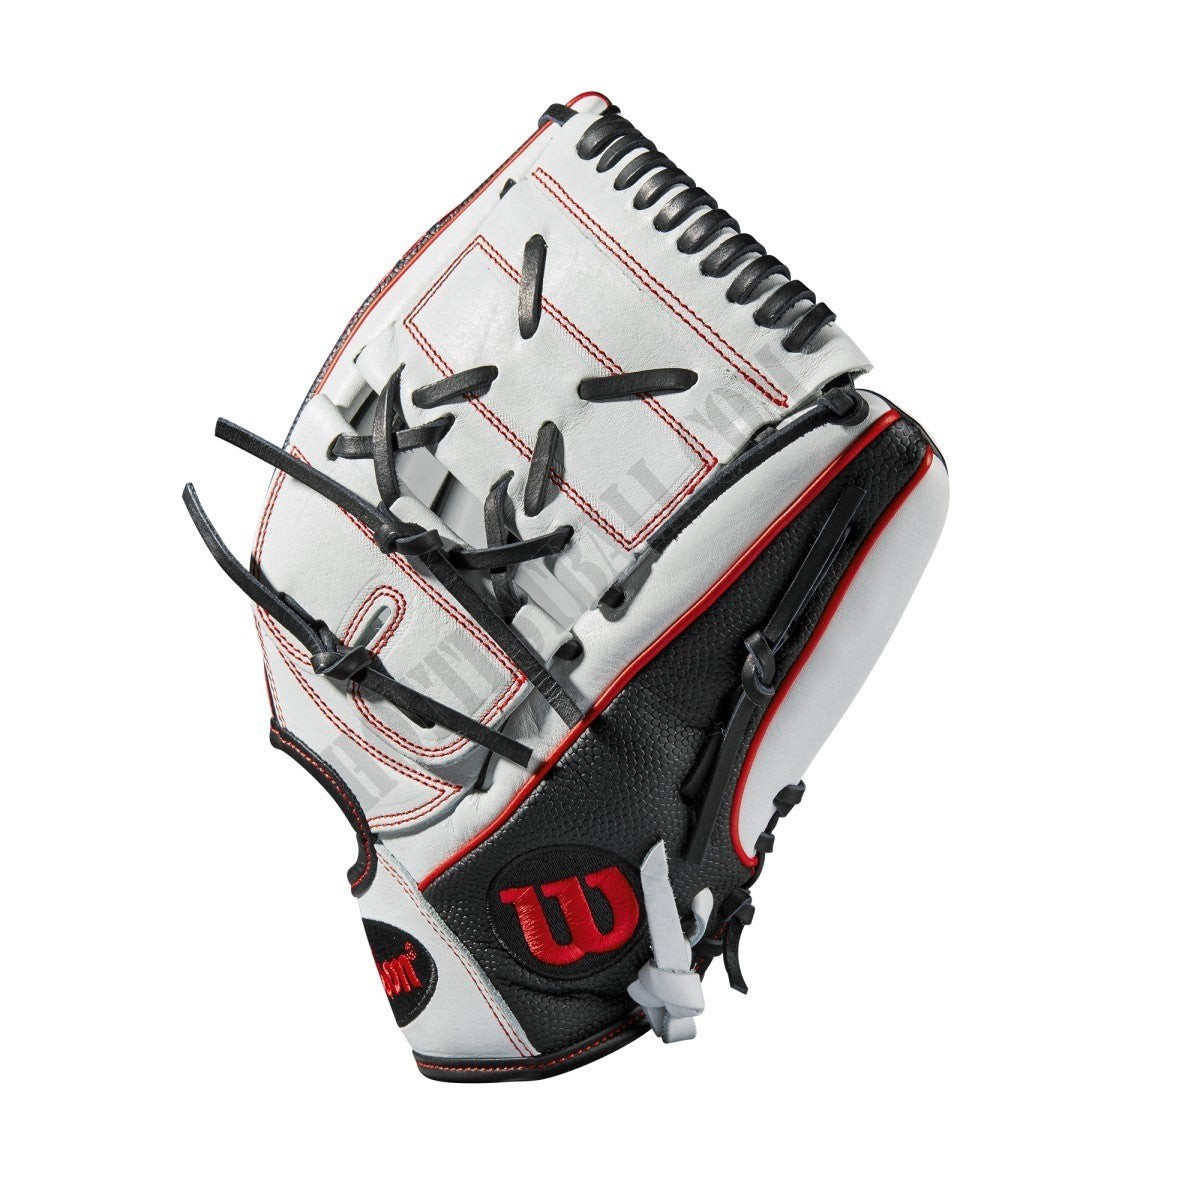 2019 A2000 MA14 GM 12.25" Pitcher's Fastpitch Glove ● Wilson Promotions - -3